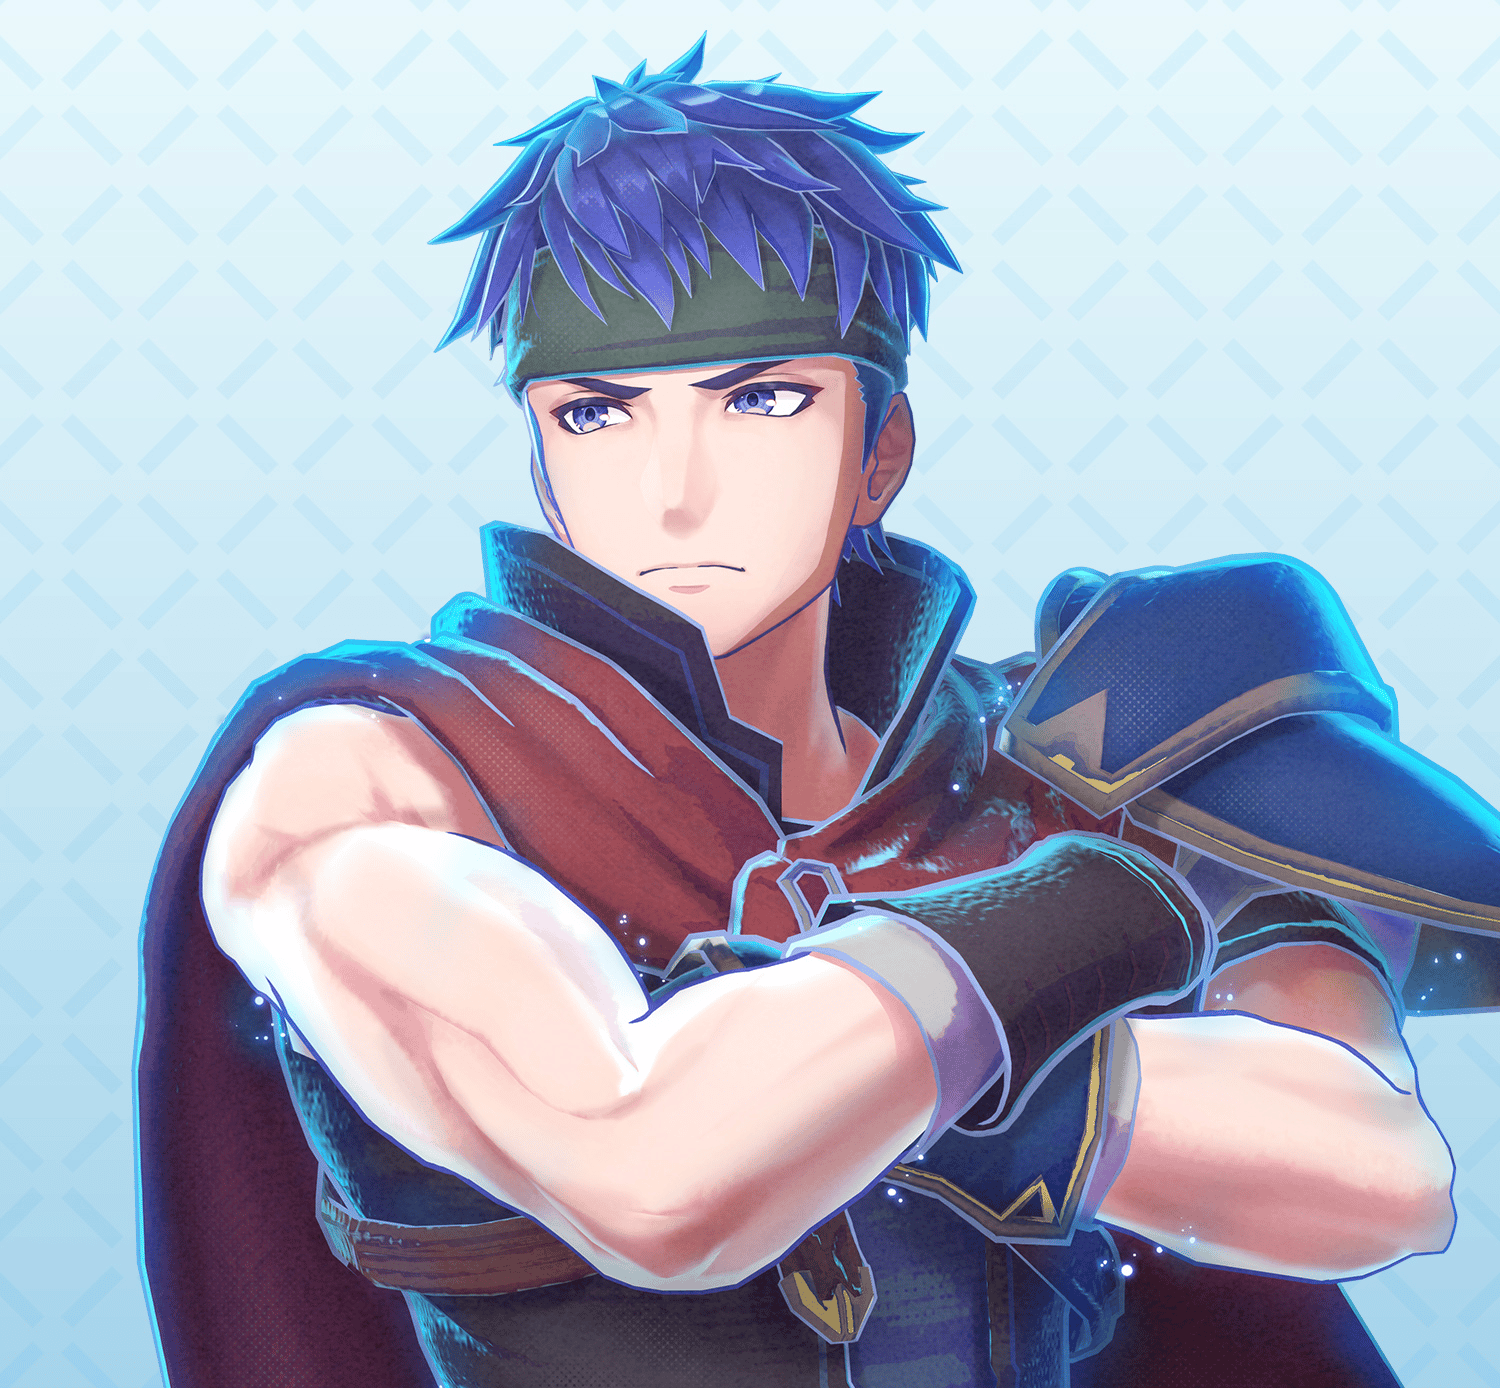 Fire Emblem Engage Introduces the Radiant Hero, Ike